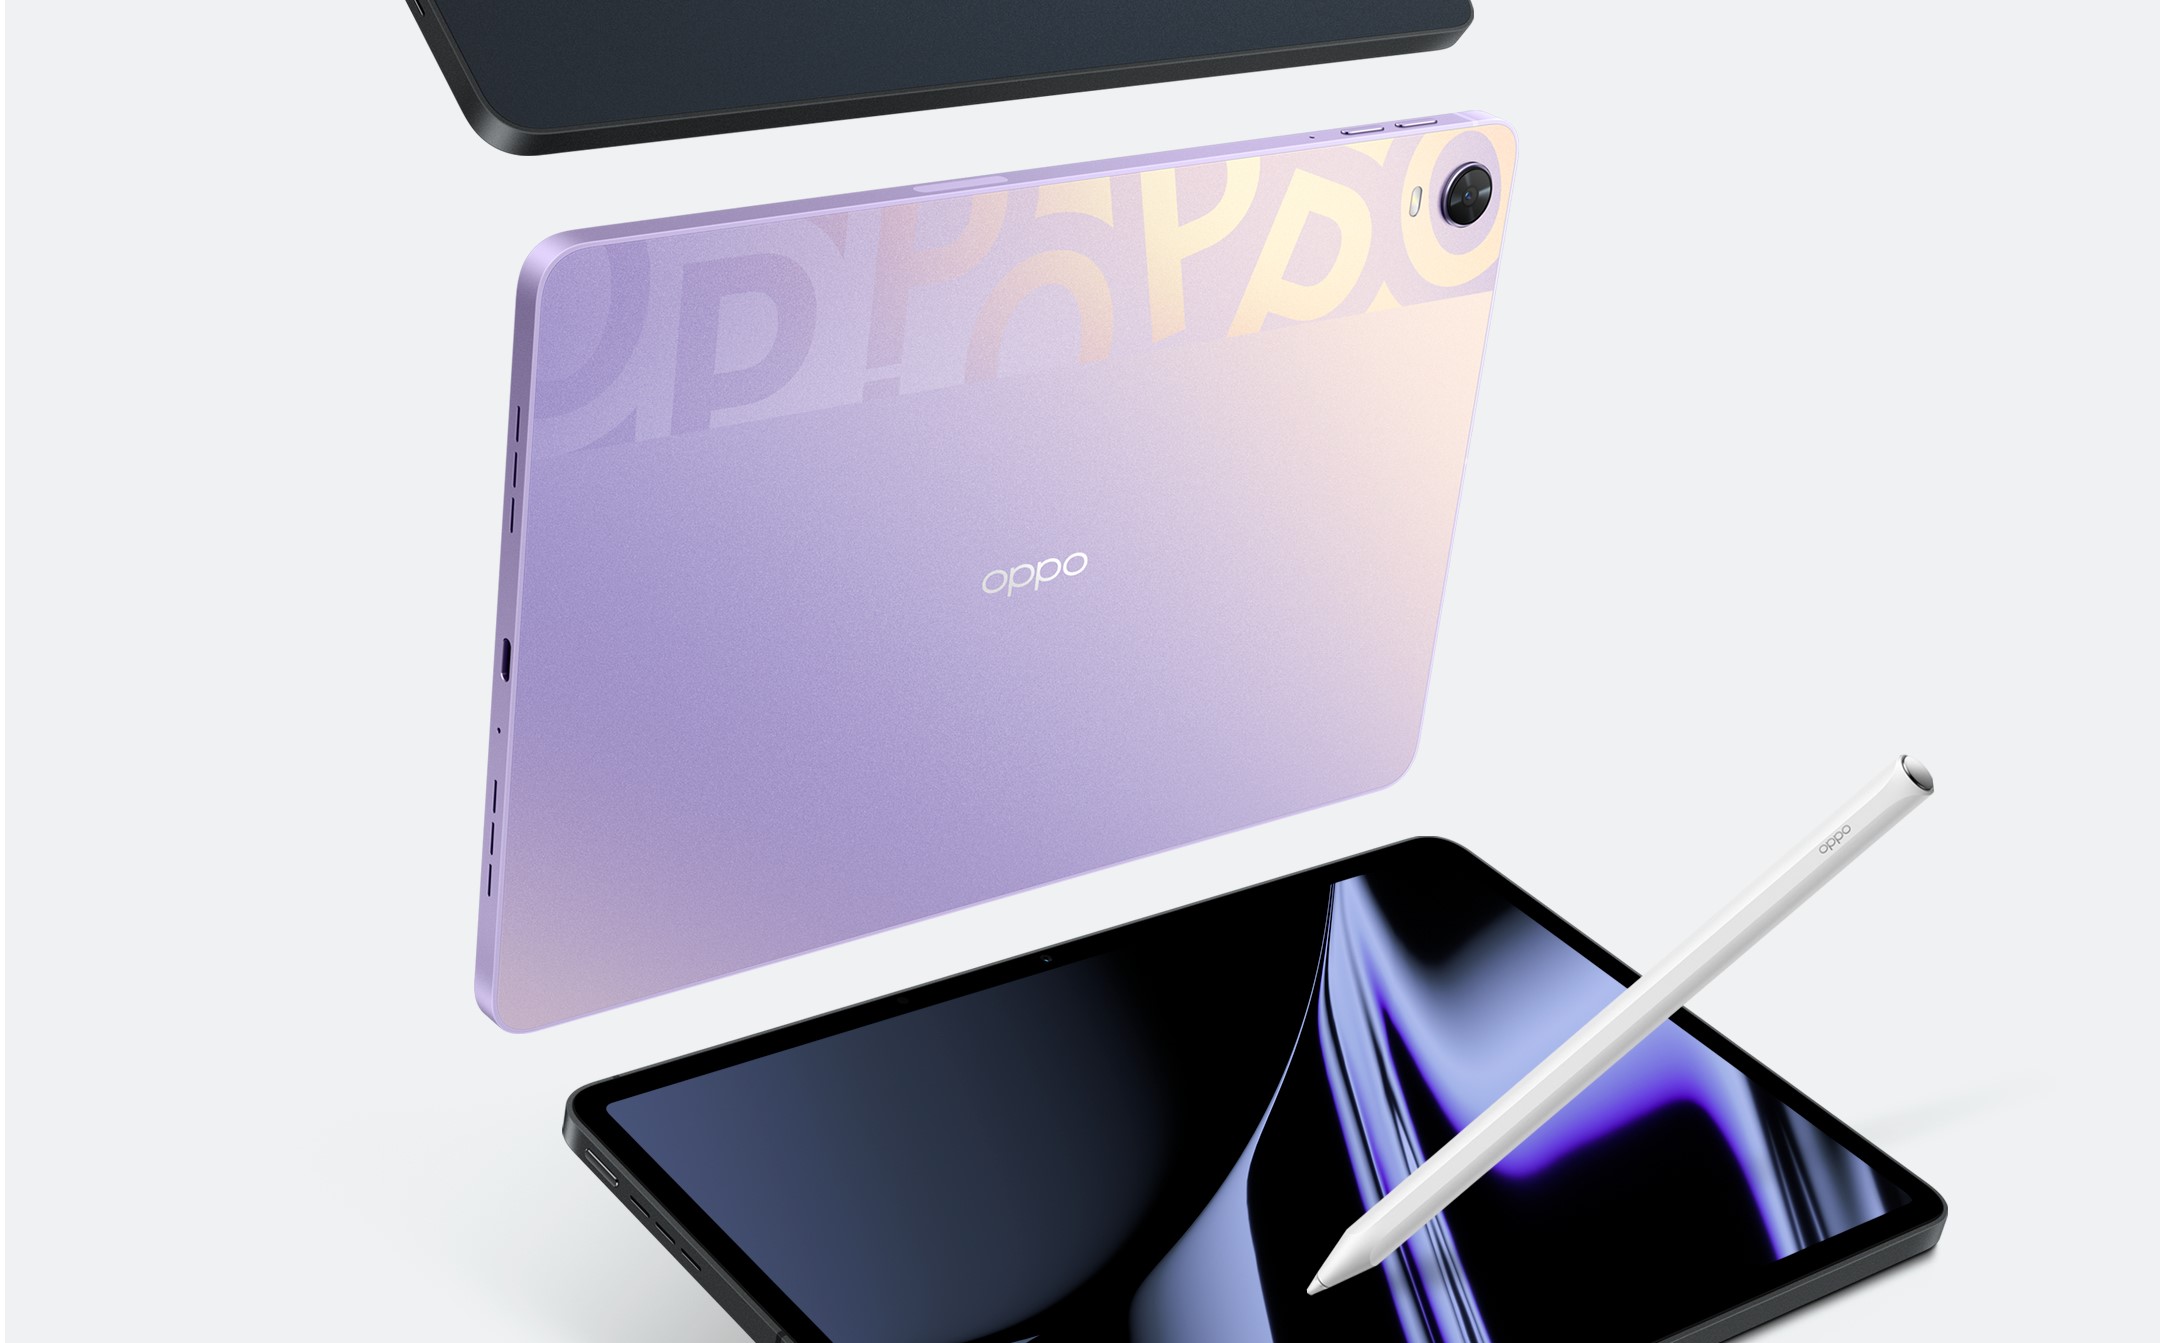 The OPPO Pad finally stars in an official teaser, confirming its imminent launch and companion stylus thumbnail